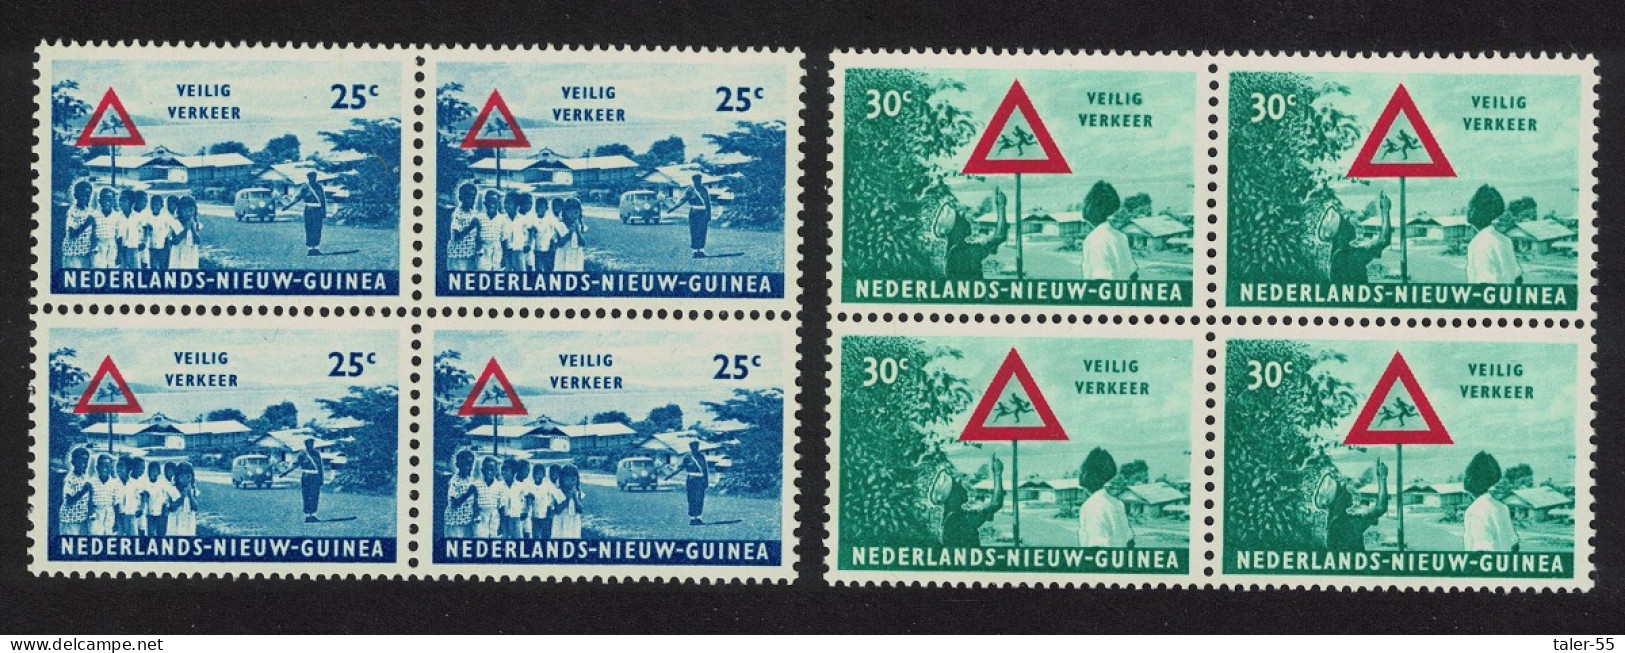 Neth. New Guinea Road Safety Campaign 2v Blocks Of 4 1962 MNH SG#79-80 - Netherlands New Guinea